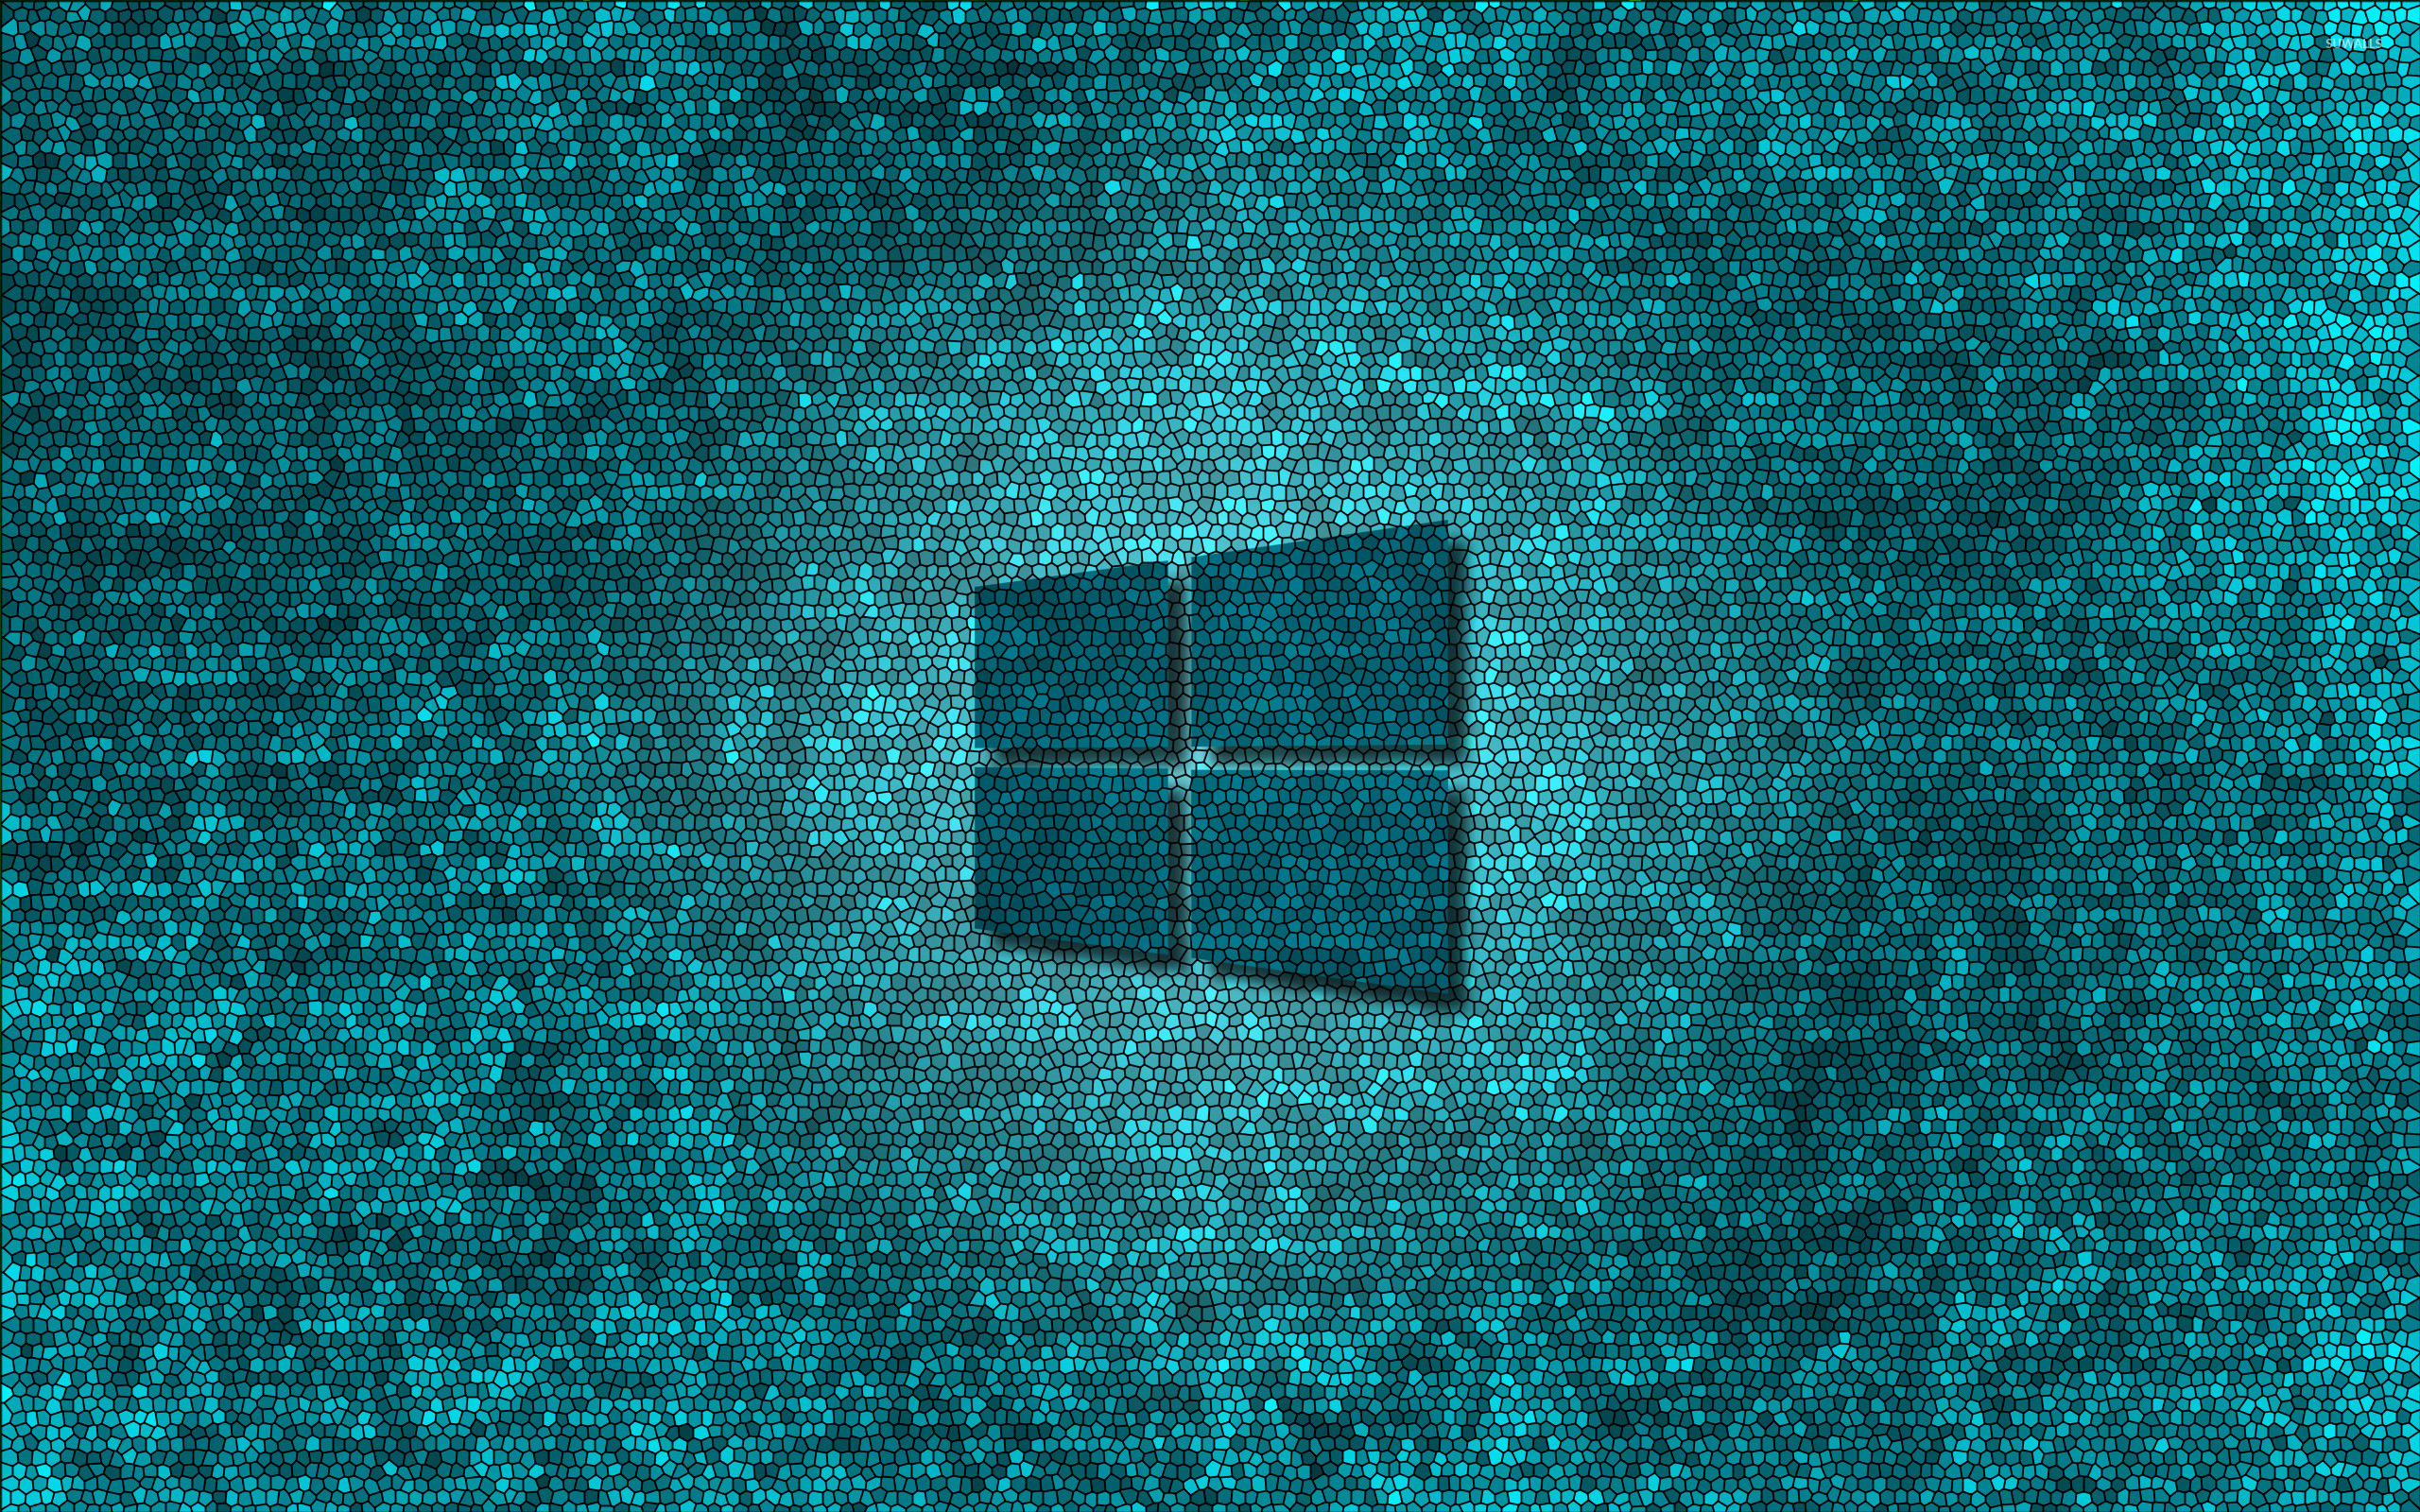 2560x1600 Windows 10 transparent logo on blue stained glass wallpaper